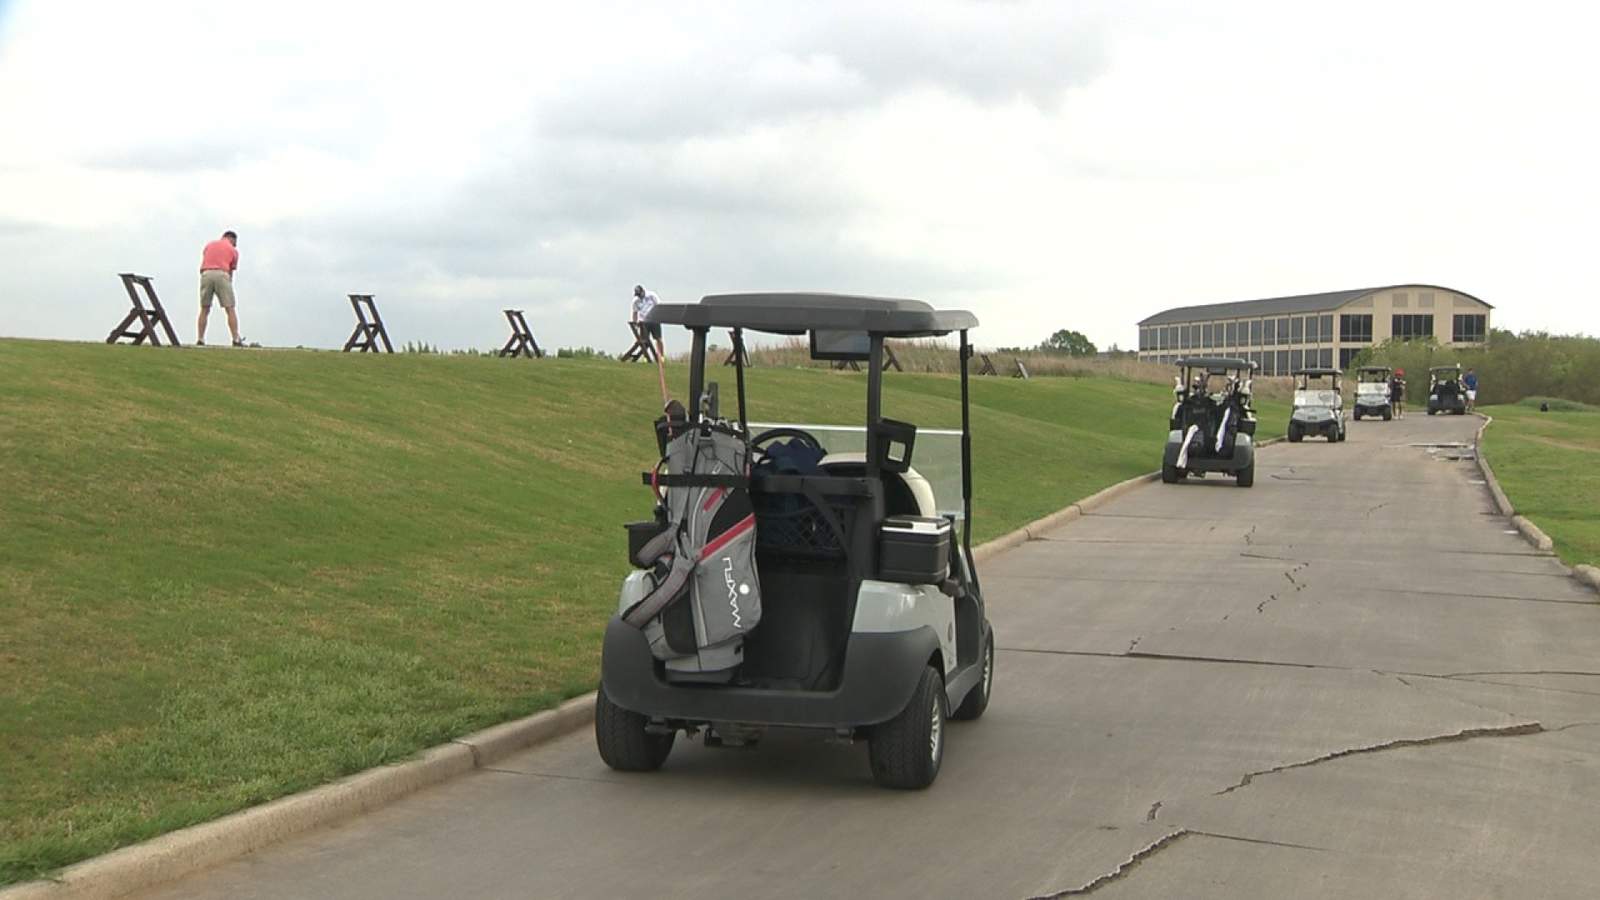 San Antonio golf courses continue to provide recreation for locals during ‘Stay Home, Work Safe’ order